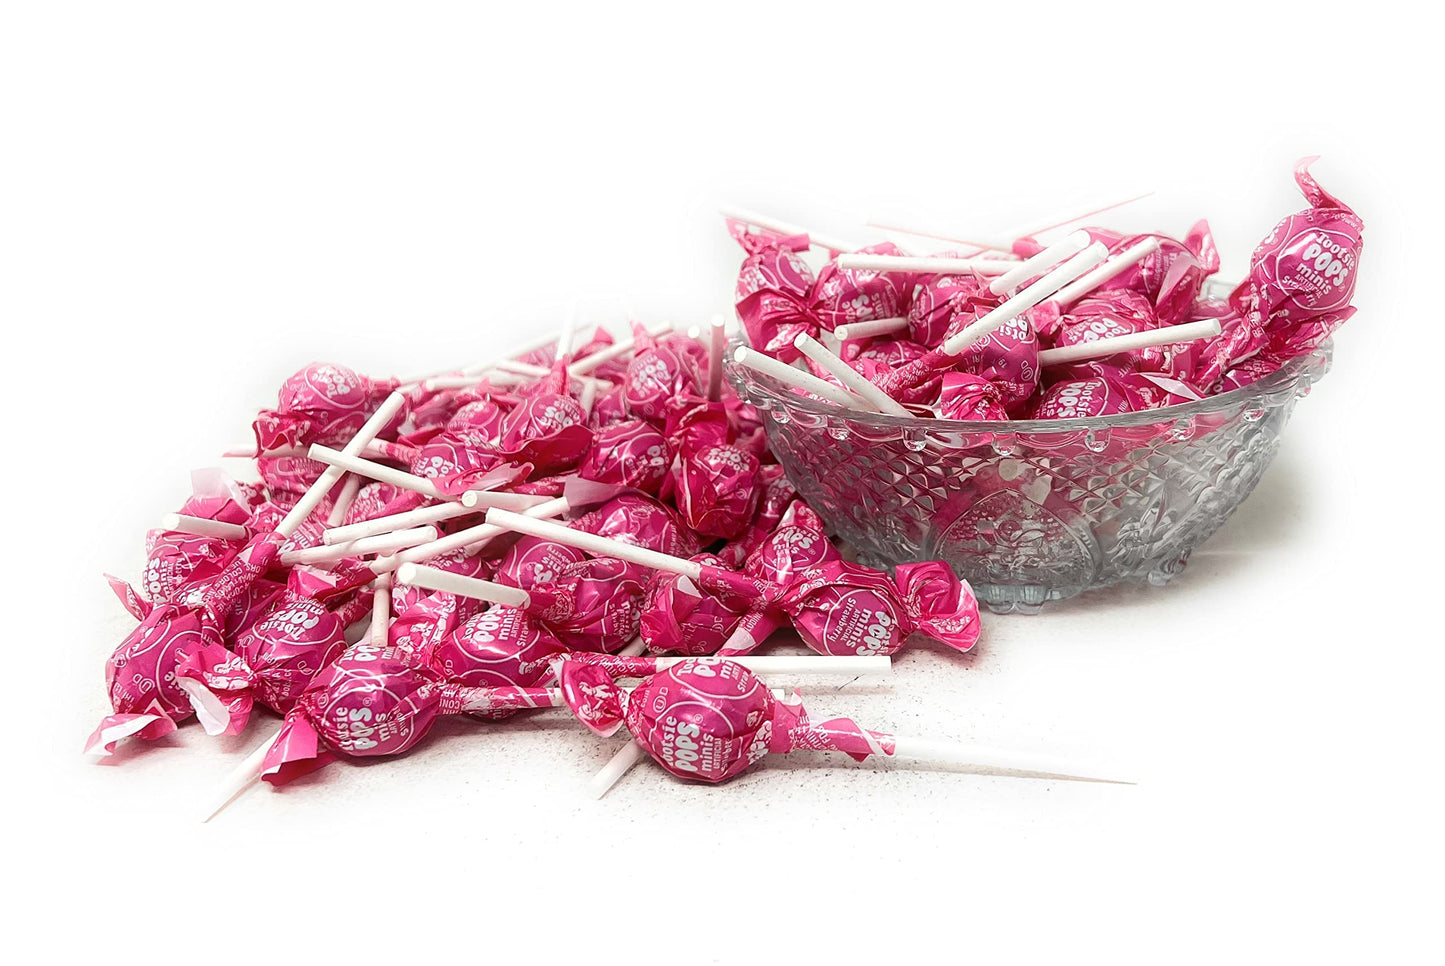 Tootsie Roll Strawberry Mini Pops Filled With Chewy Tootsie Roll Candy - Single Flavor 75+ Count Lollipops 1 Lb (16 Oz)